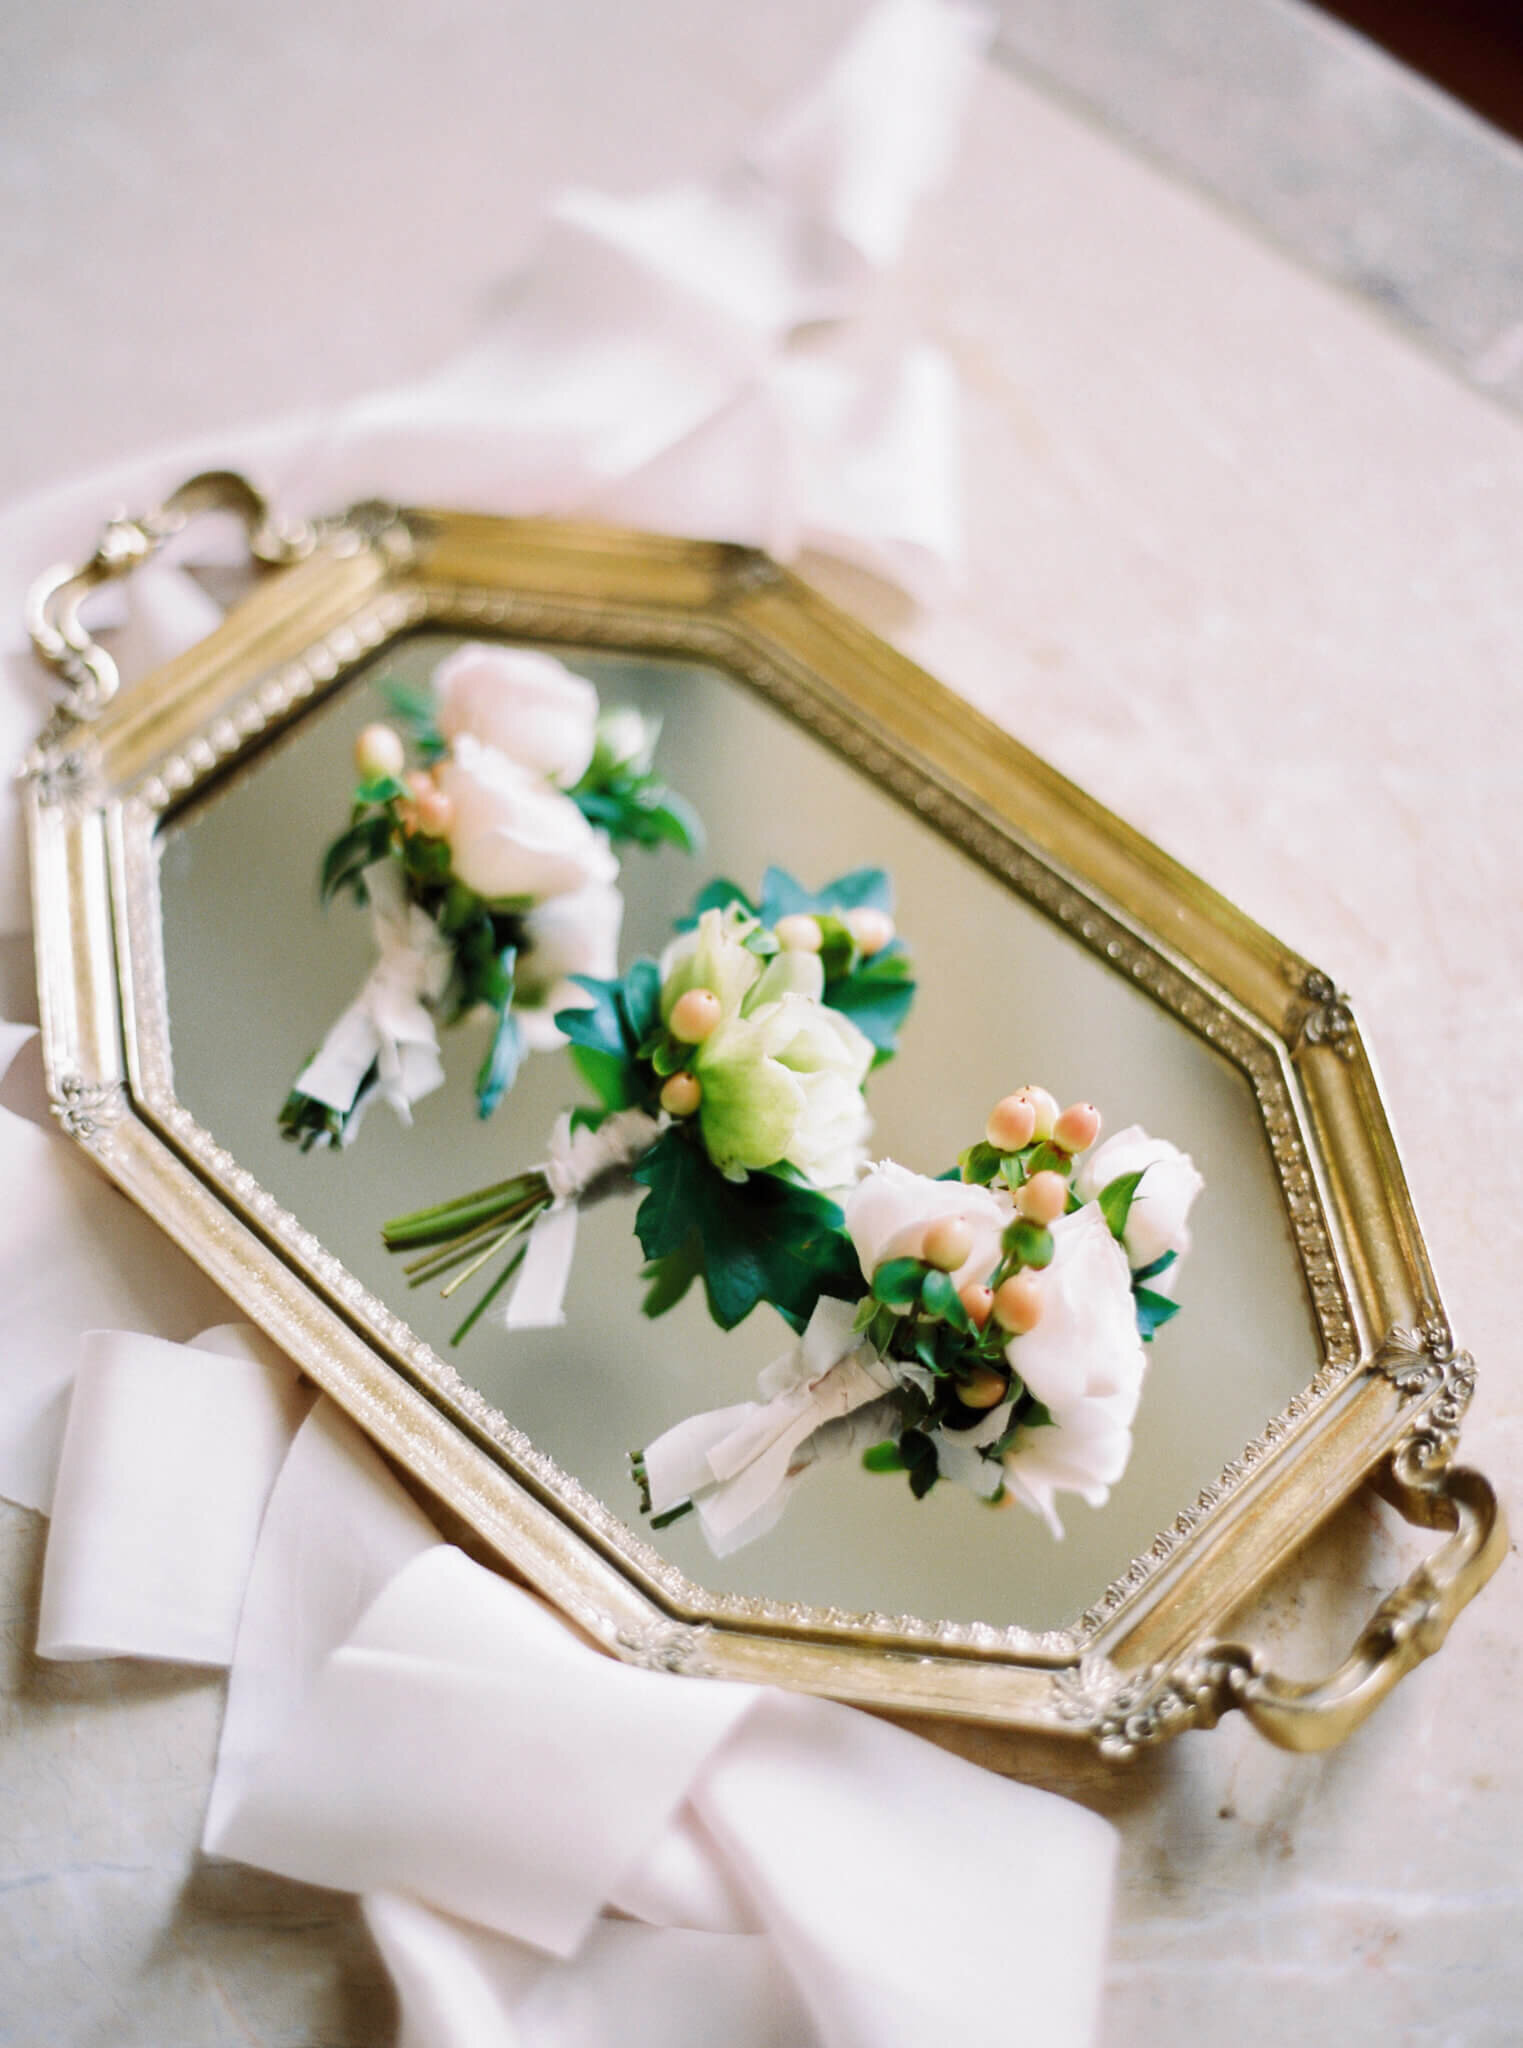 Grrom florals on gold tray sttled by Splendida Weddings _Passionate_wedding_photography